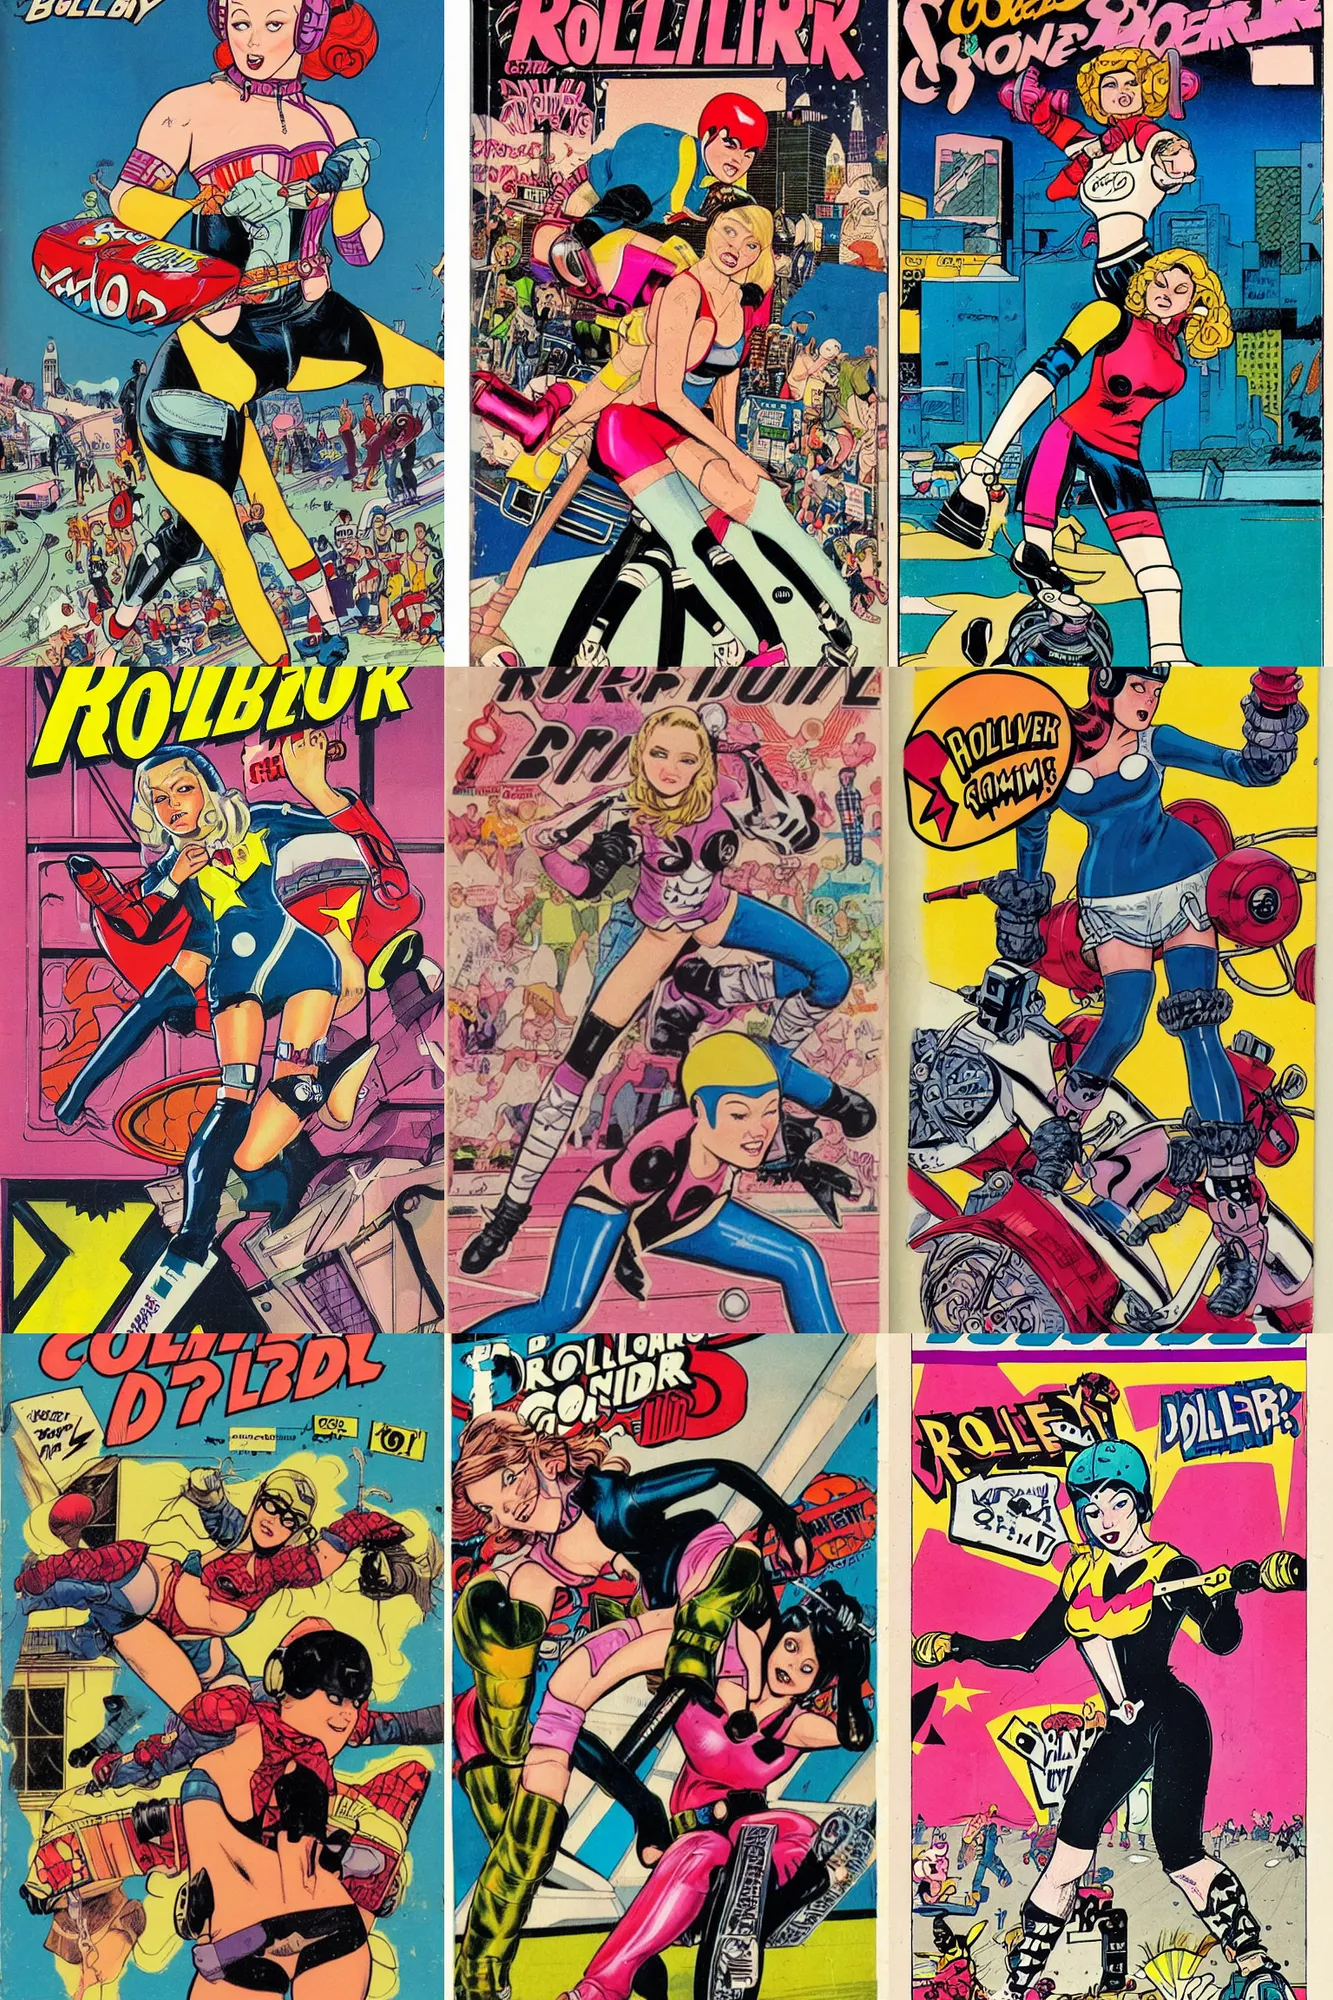 Prompt: comic book cover of roller derby girl illustration by Frank Hampson